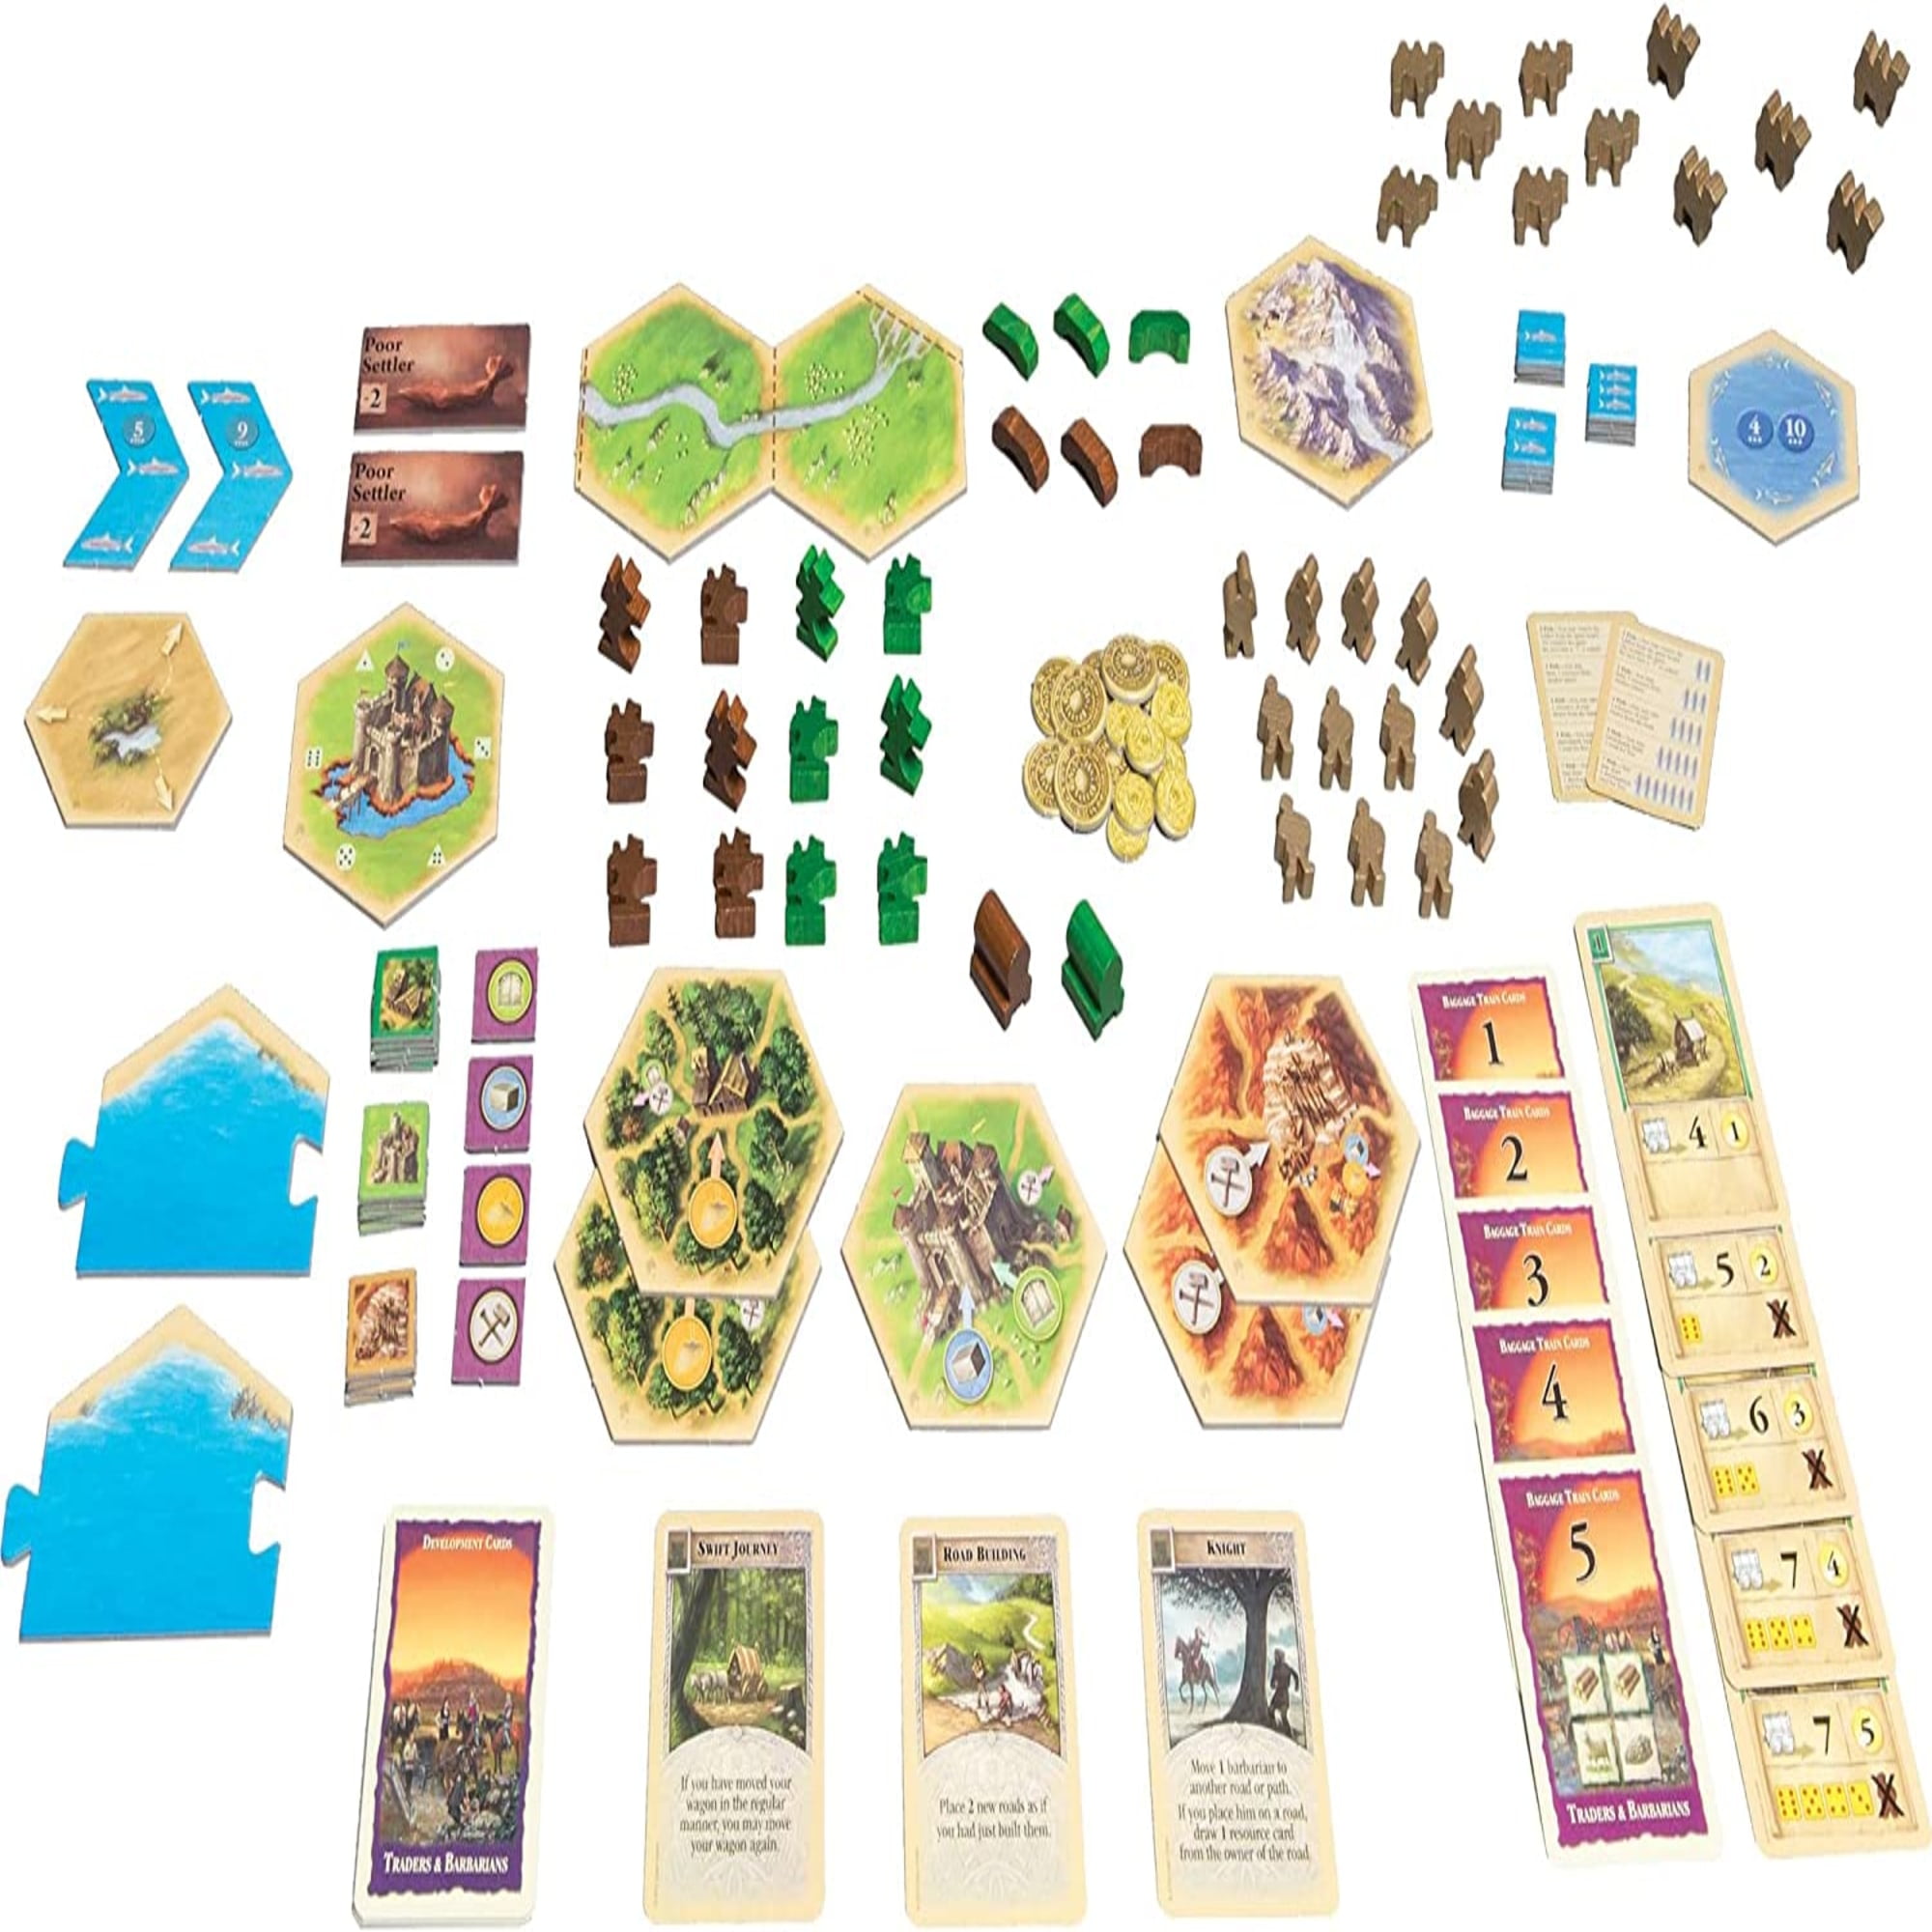 Catan: 5-6 Player Extension Strategy Board Game for ages 10 and up